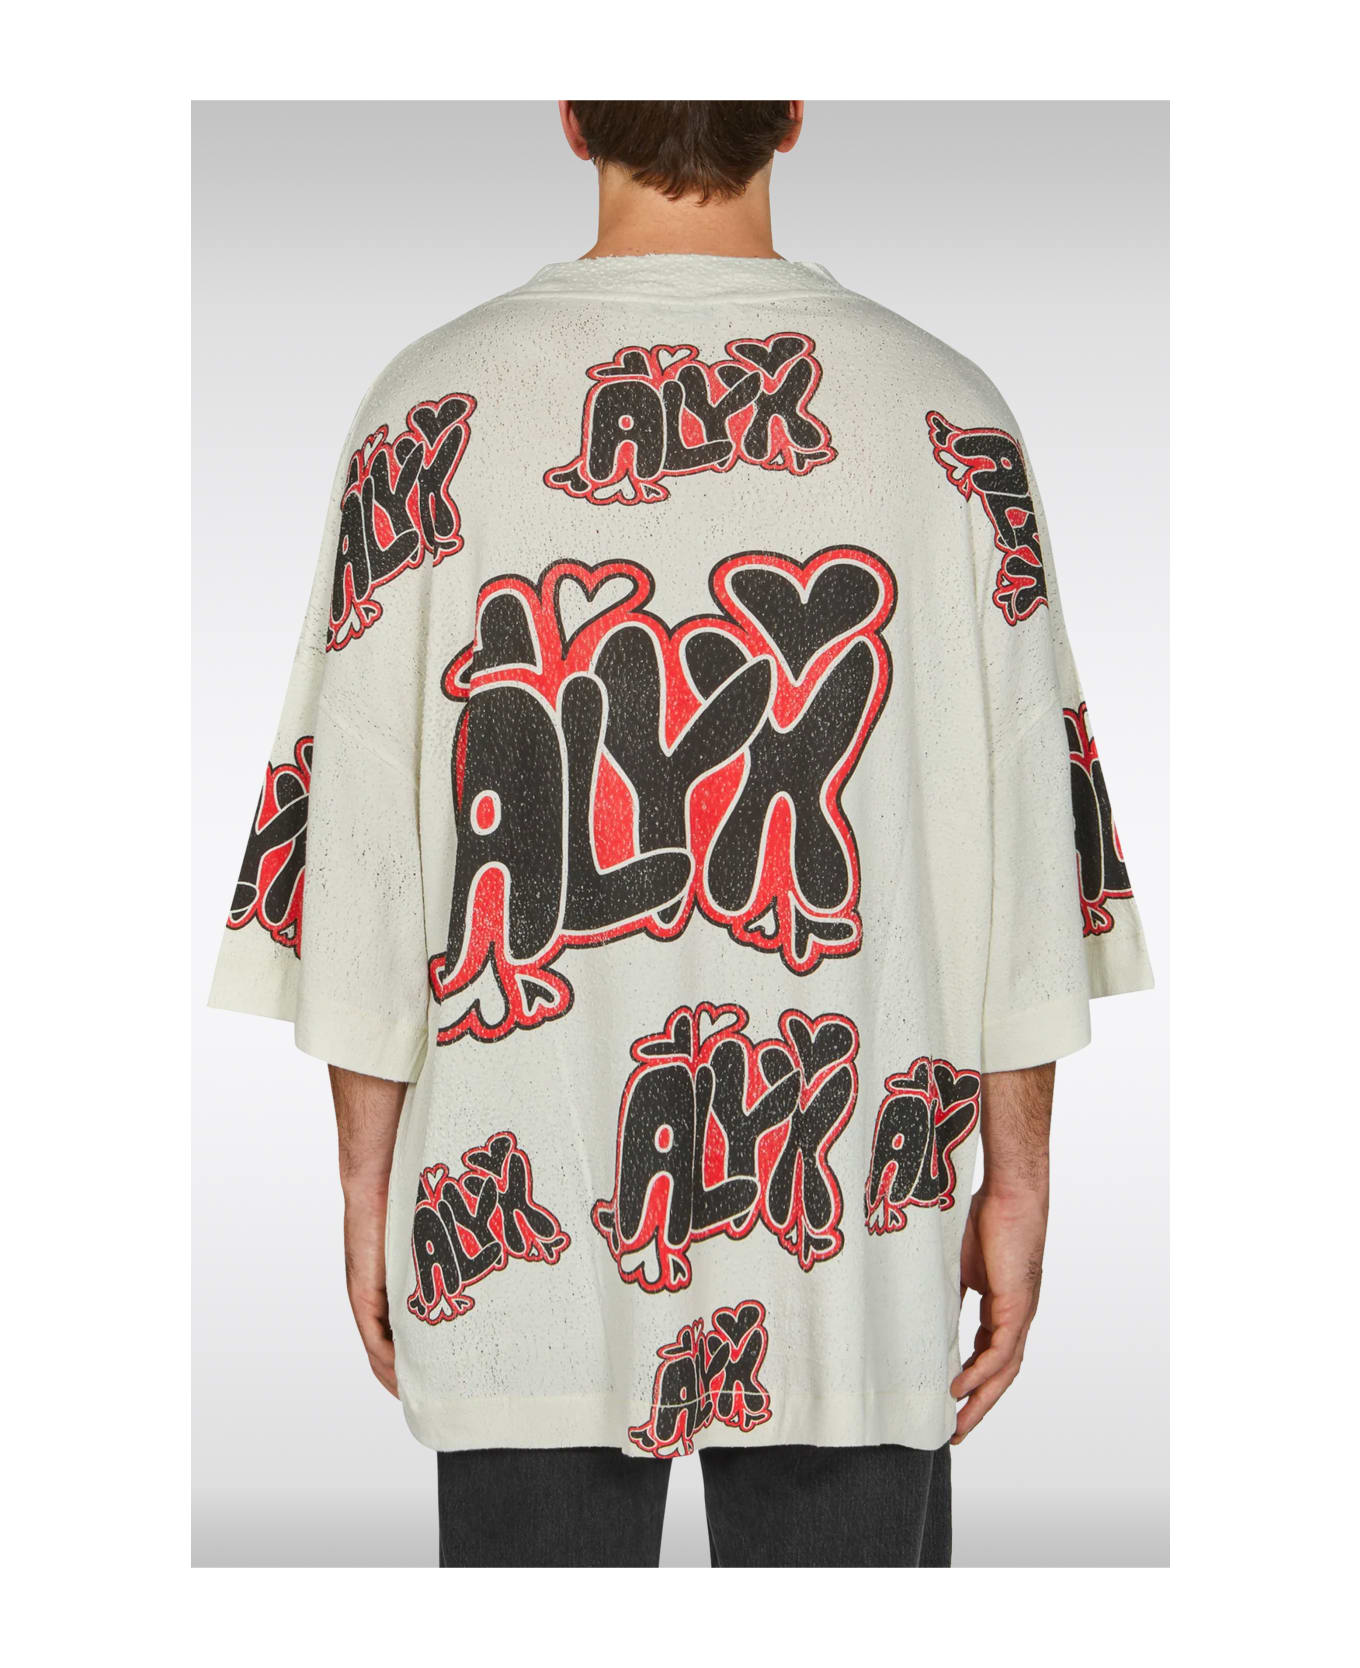 1017 ALYX 9SM Oversize Needle Punch Graphic Tee Off White Distressed Jersey T-shirt With Logo Pattern - Oversize Needle Punch Graphic Tee - Panna シャツ